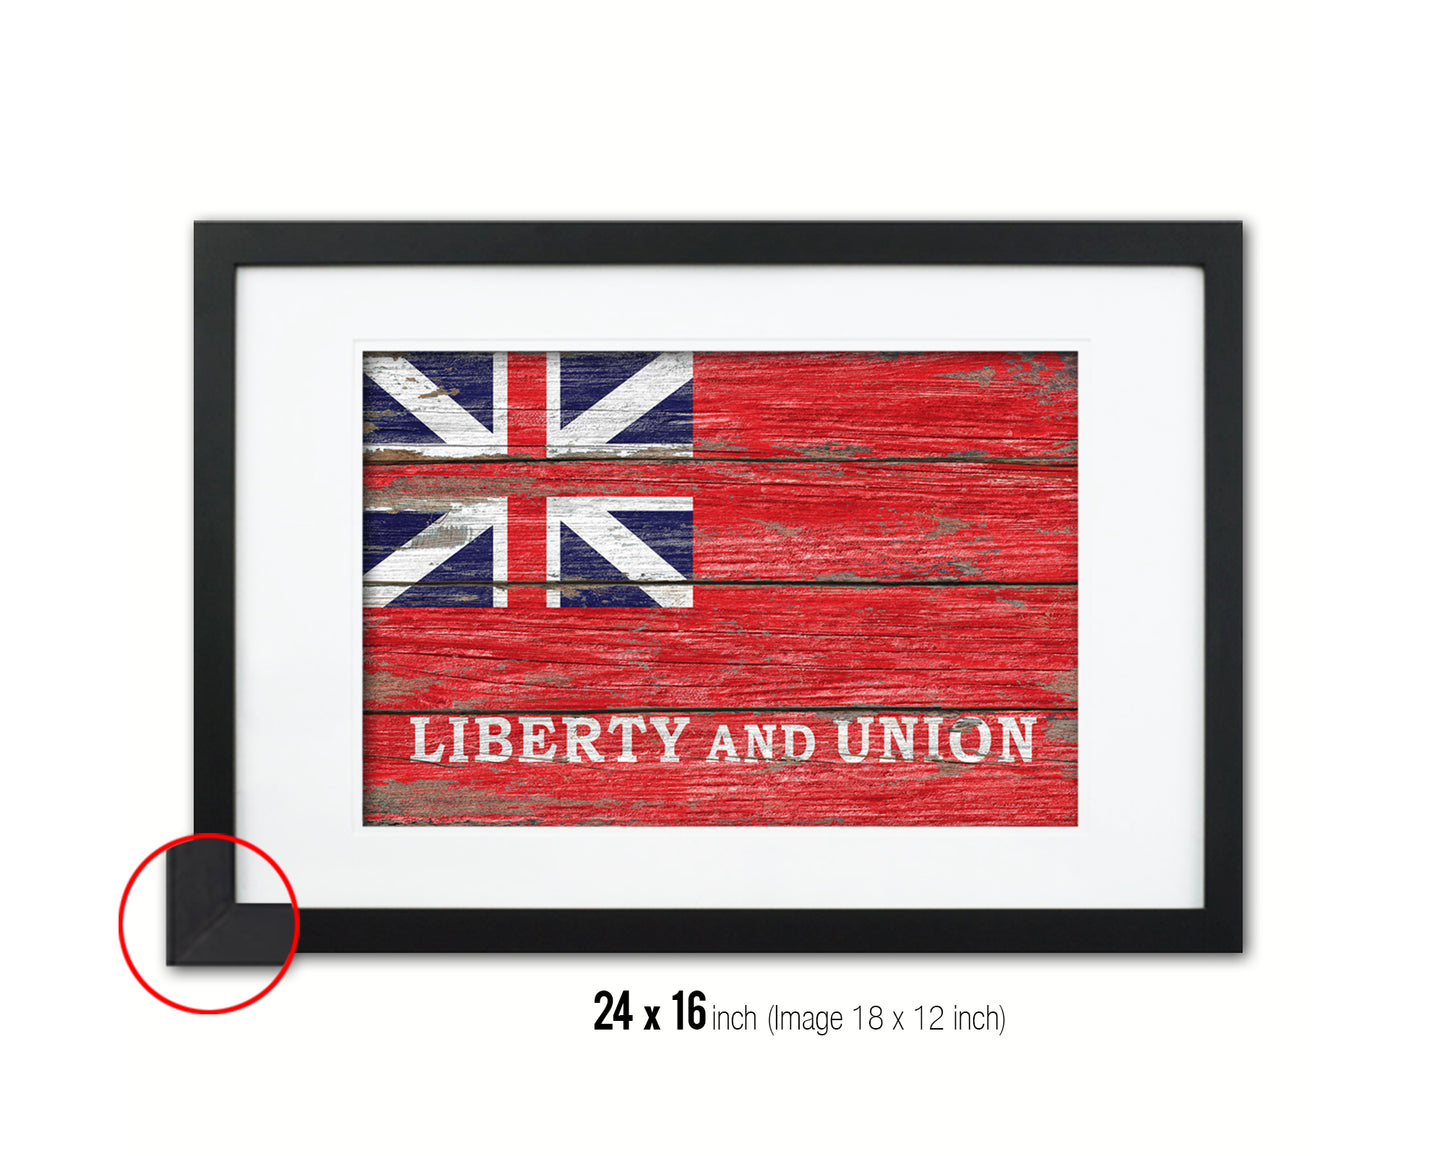 Liberty and Union Wood Rustic Flag Wood Framed Print Wall Art Decor Gifts